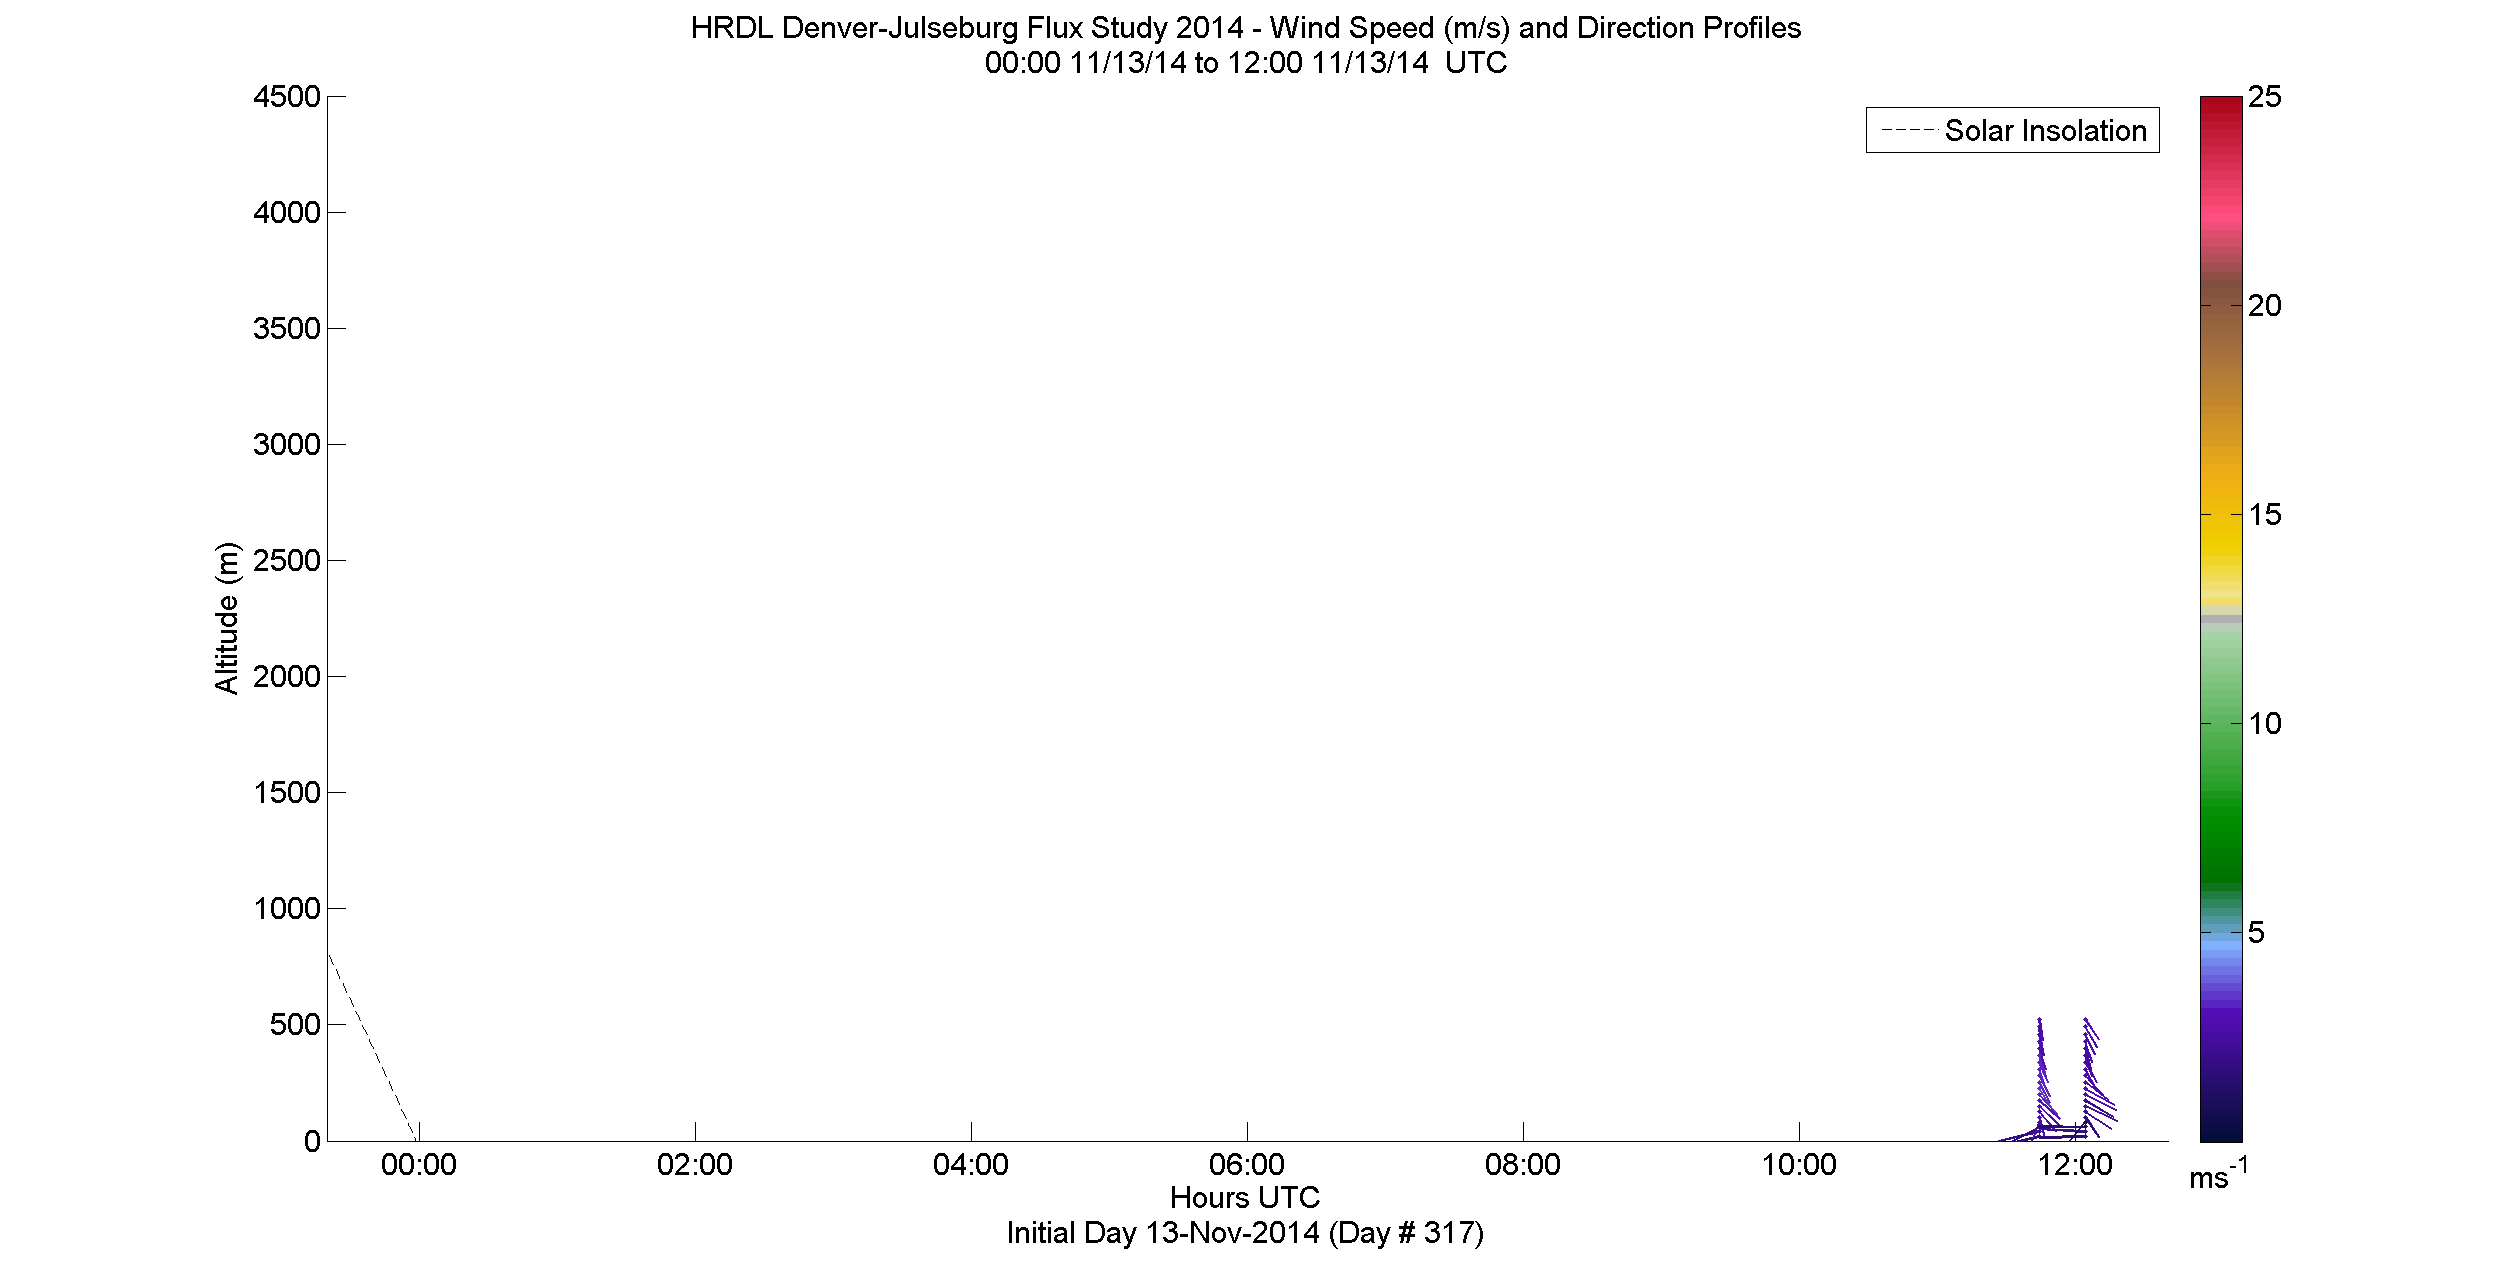 HRDL speed and direction profile - November 13 am